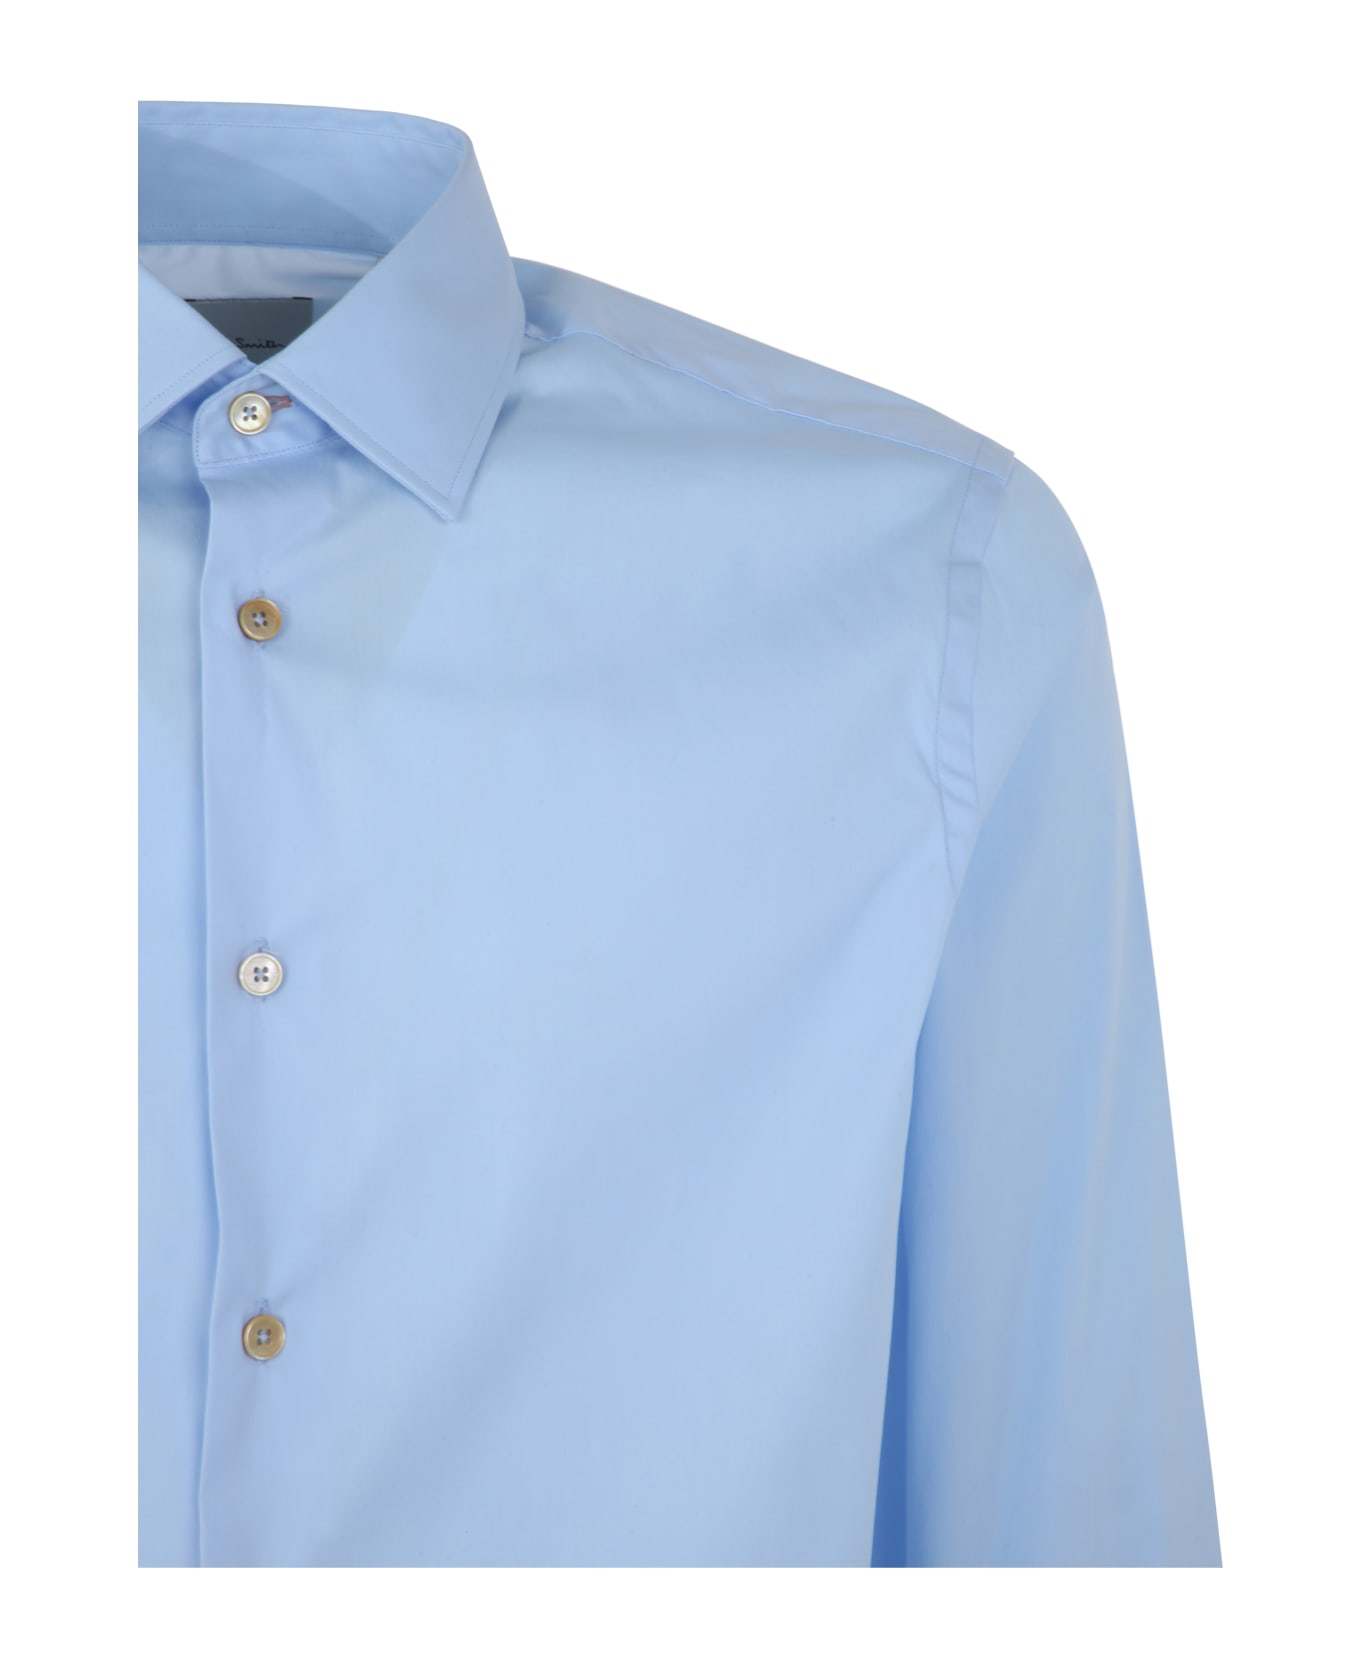 Paul Smith Mens Tailored Fit Shirt - Ltblu